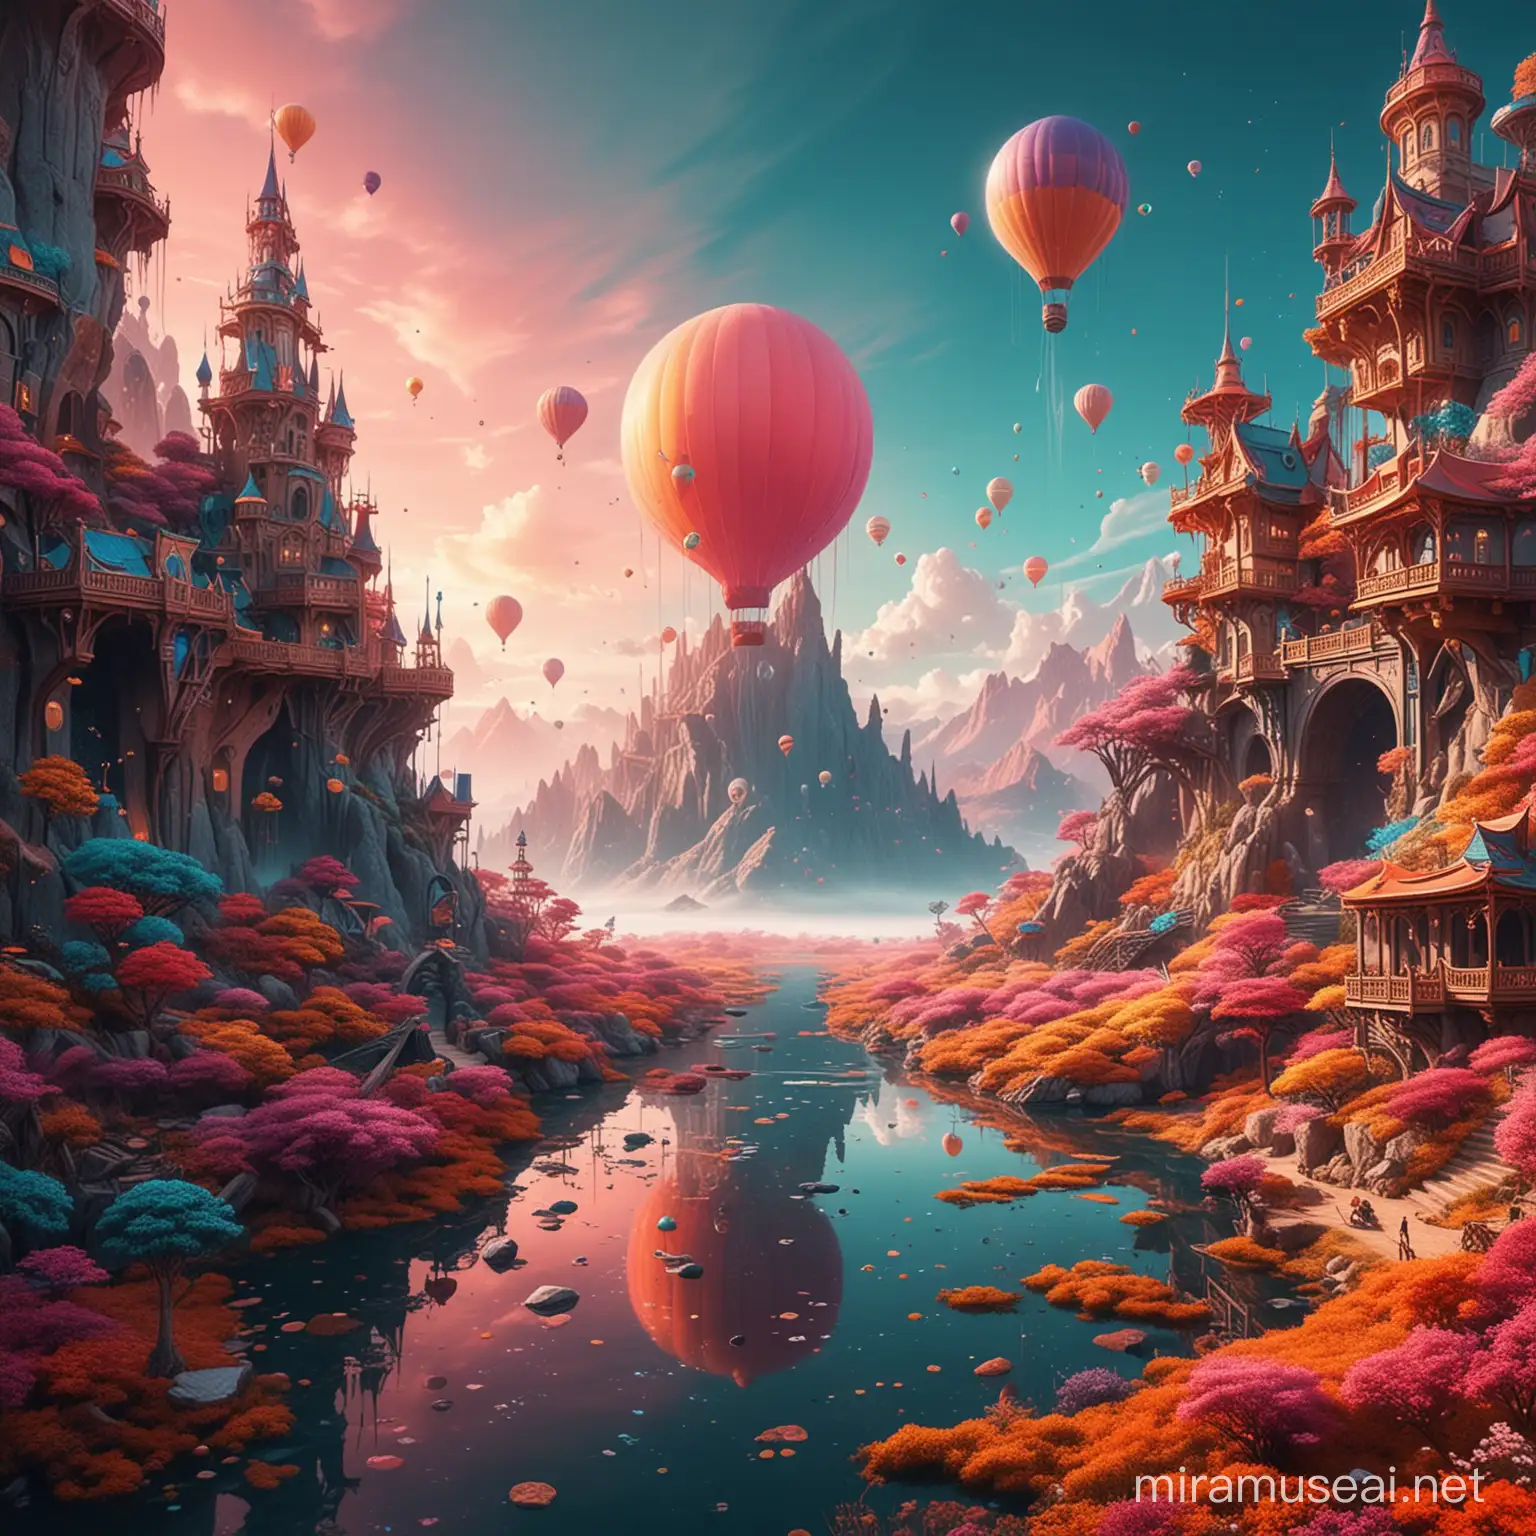 Vibrant Fantasy World with Surreal Colors and Whimsical Composition